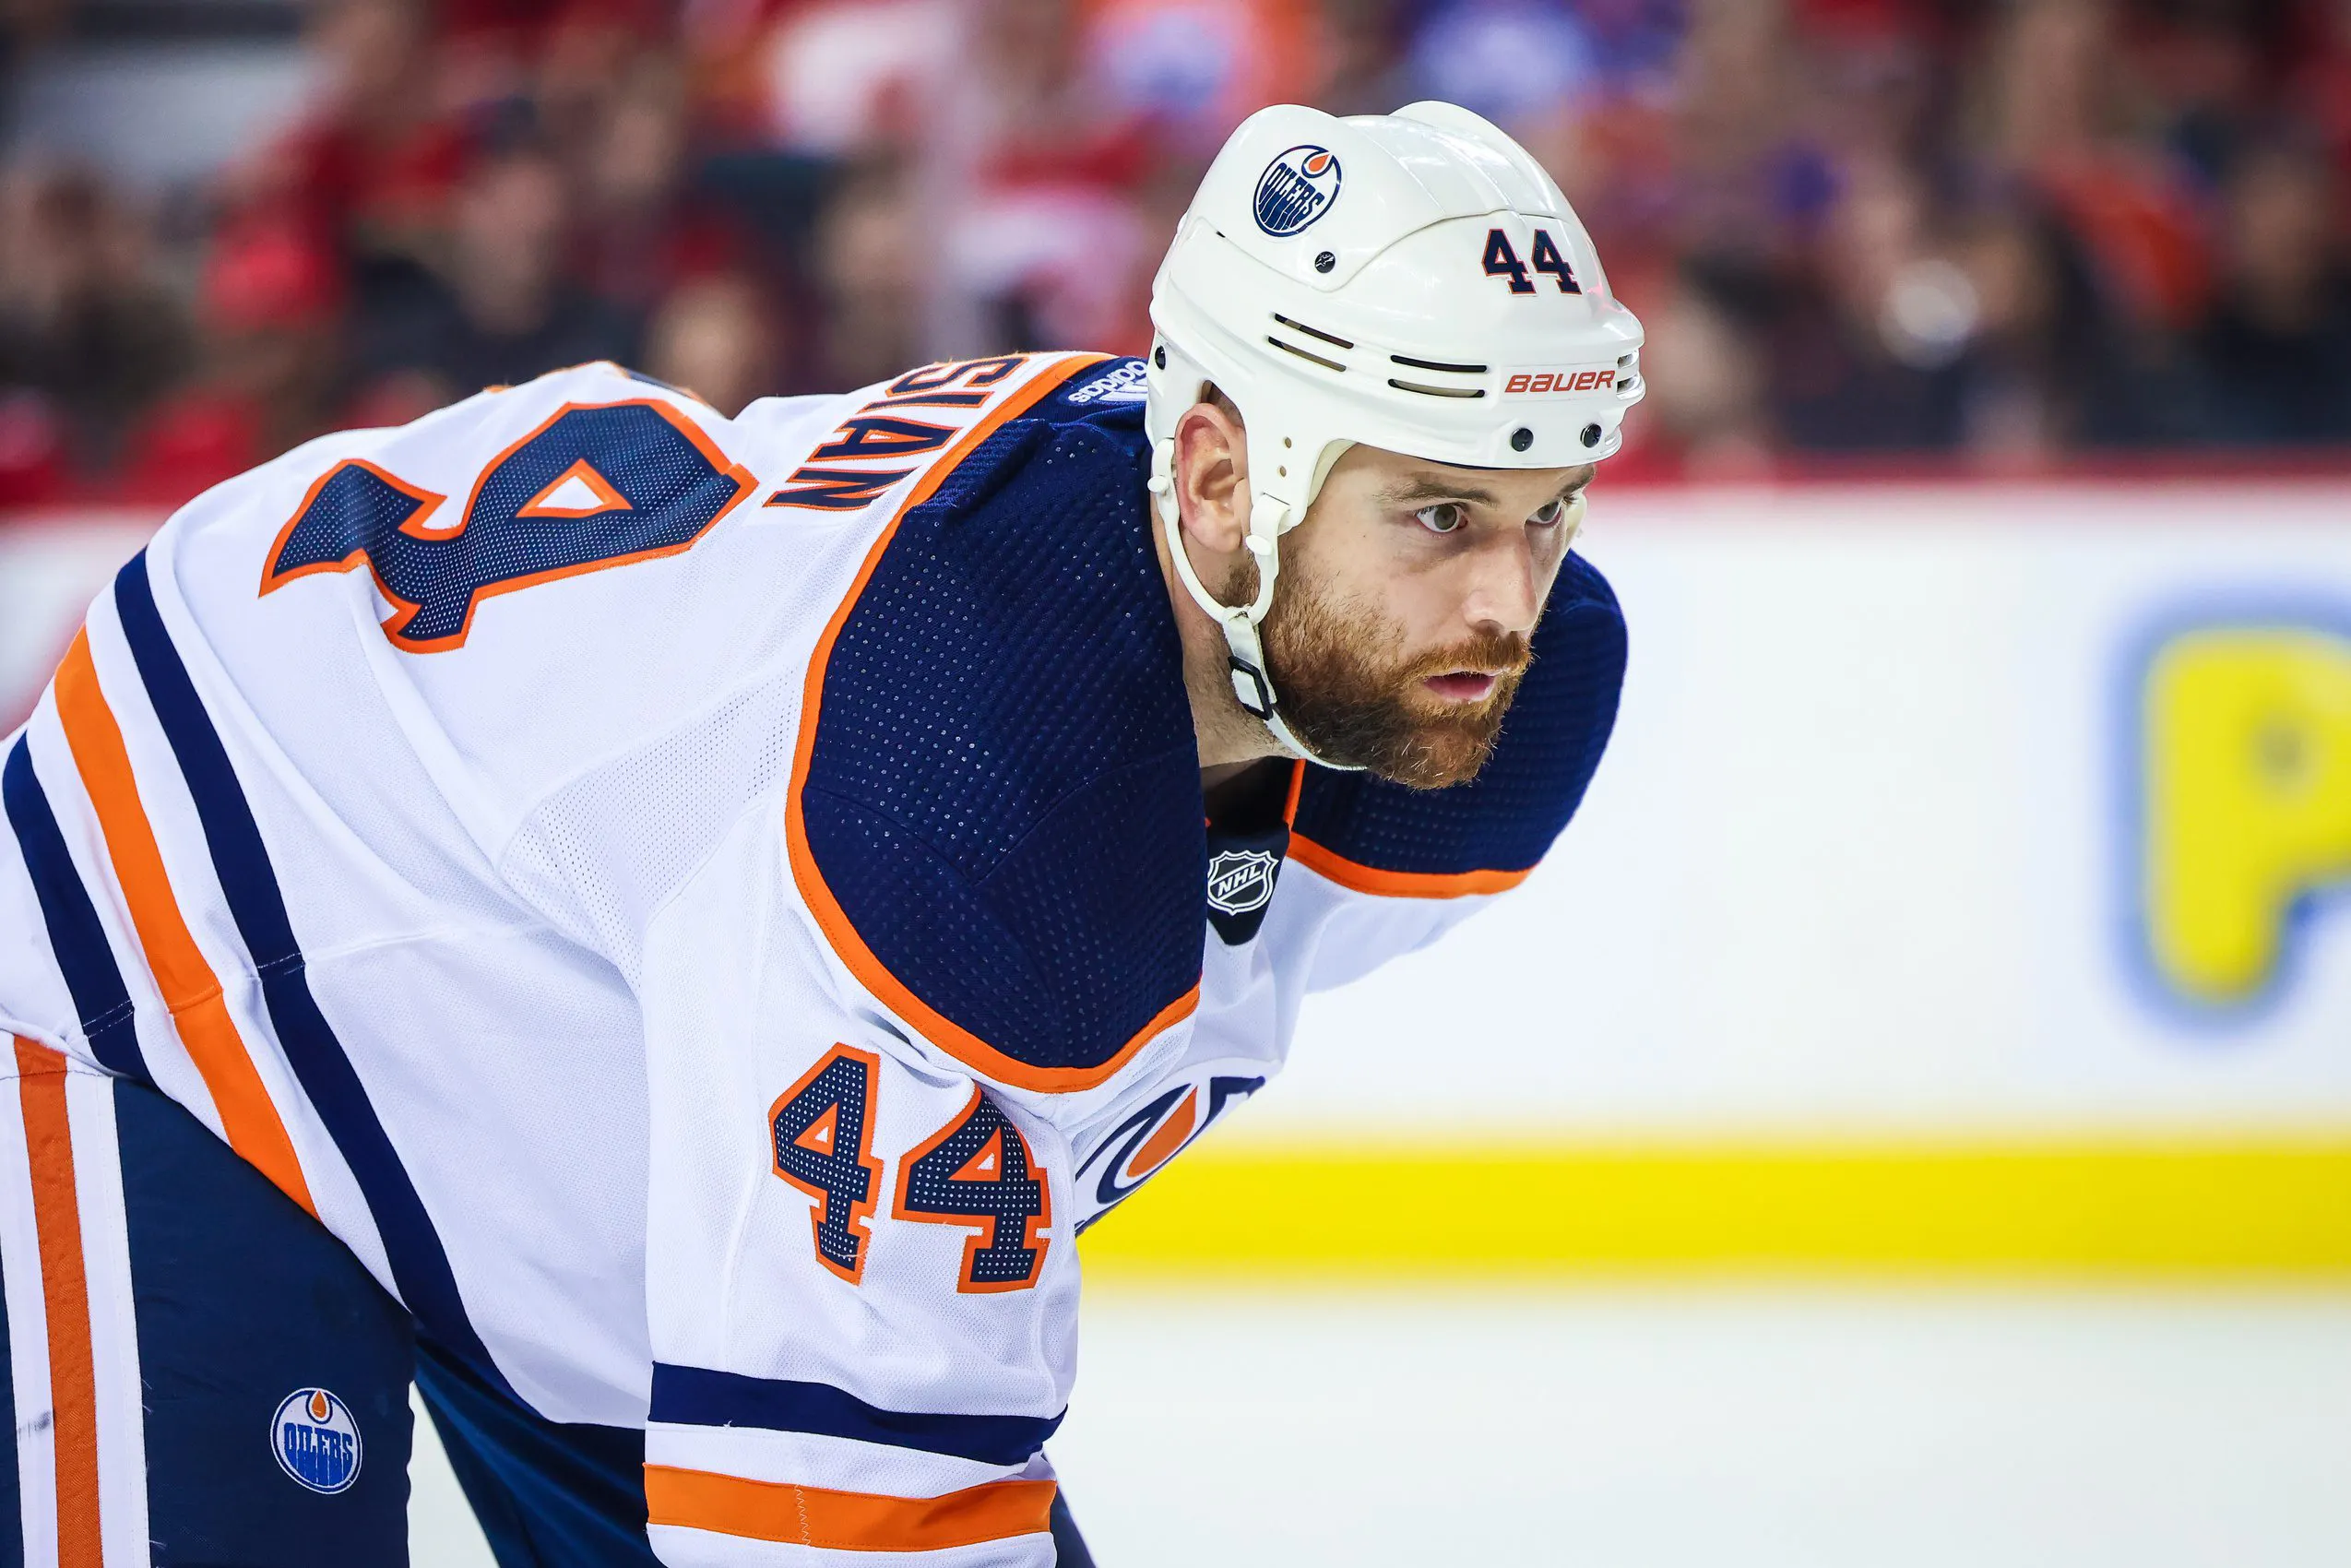 Never forget Zack Kassian's playoff beard. #oilers #nhl